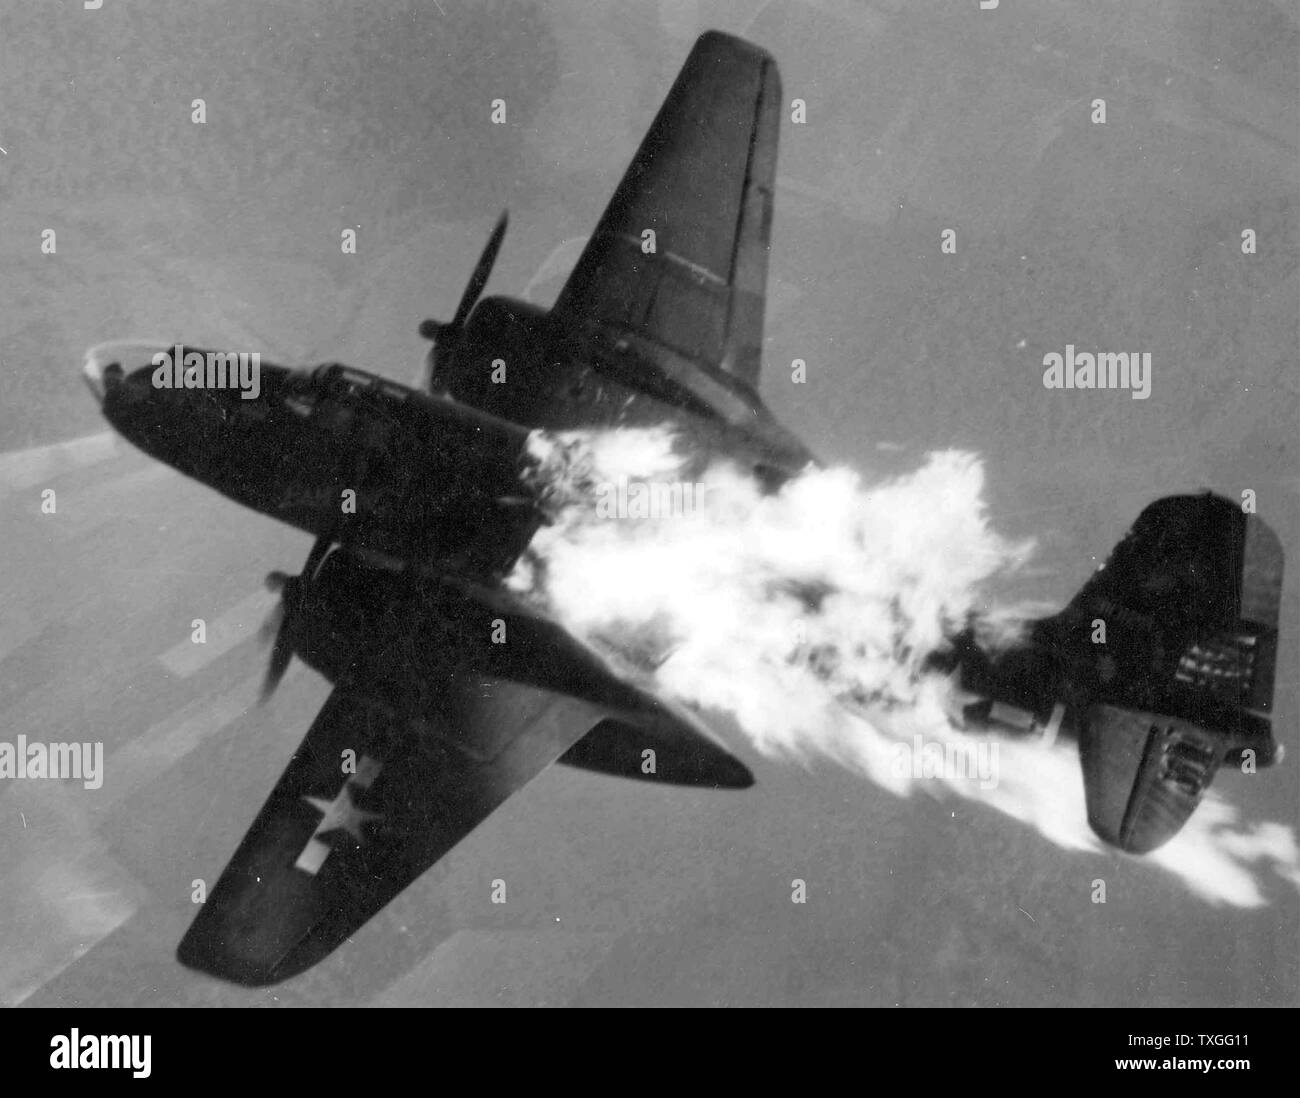 Douglas A-20J-10-DO (S/N 43-10129) of the 409th or 416th Bomb Group after being hit by flak over Germany. 1944 Stock Photo